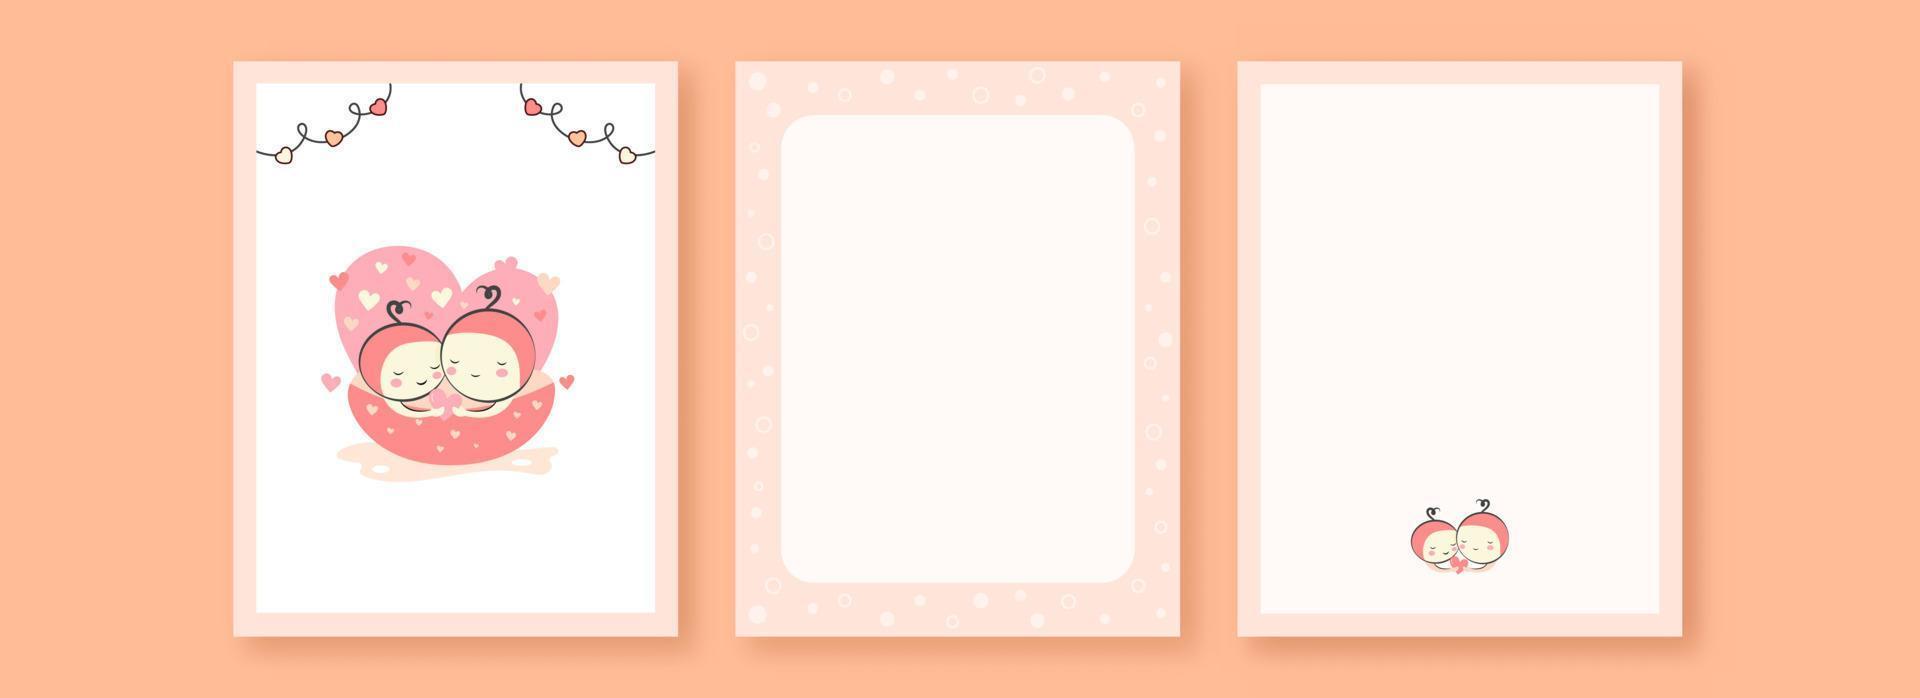 Greeting Card Templates Layout With Cute Babies Character Inside Bathtub And Space For Text. vector